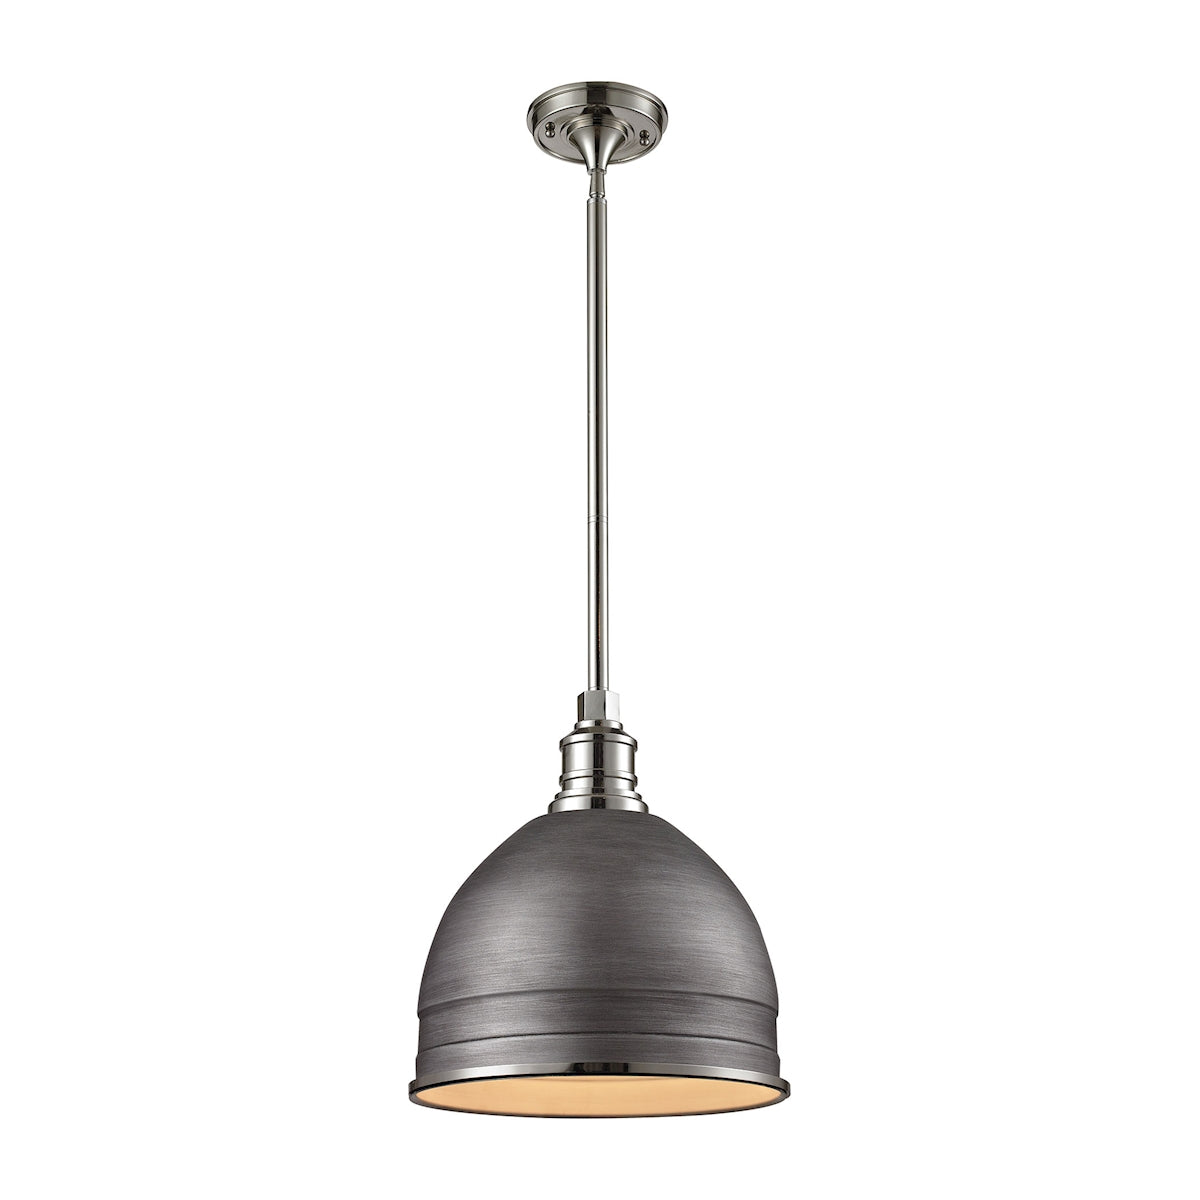 ELK Lighting 66882/1 Carolton 1-Light Pendant in Polished Nickel and Weathered Zinc with Brushed Grey Shade